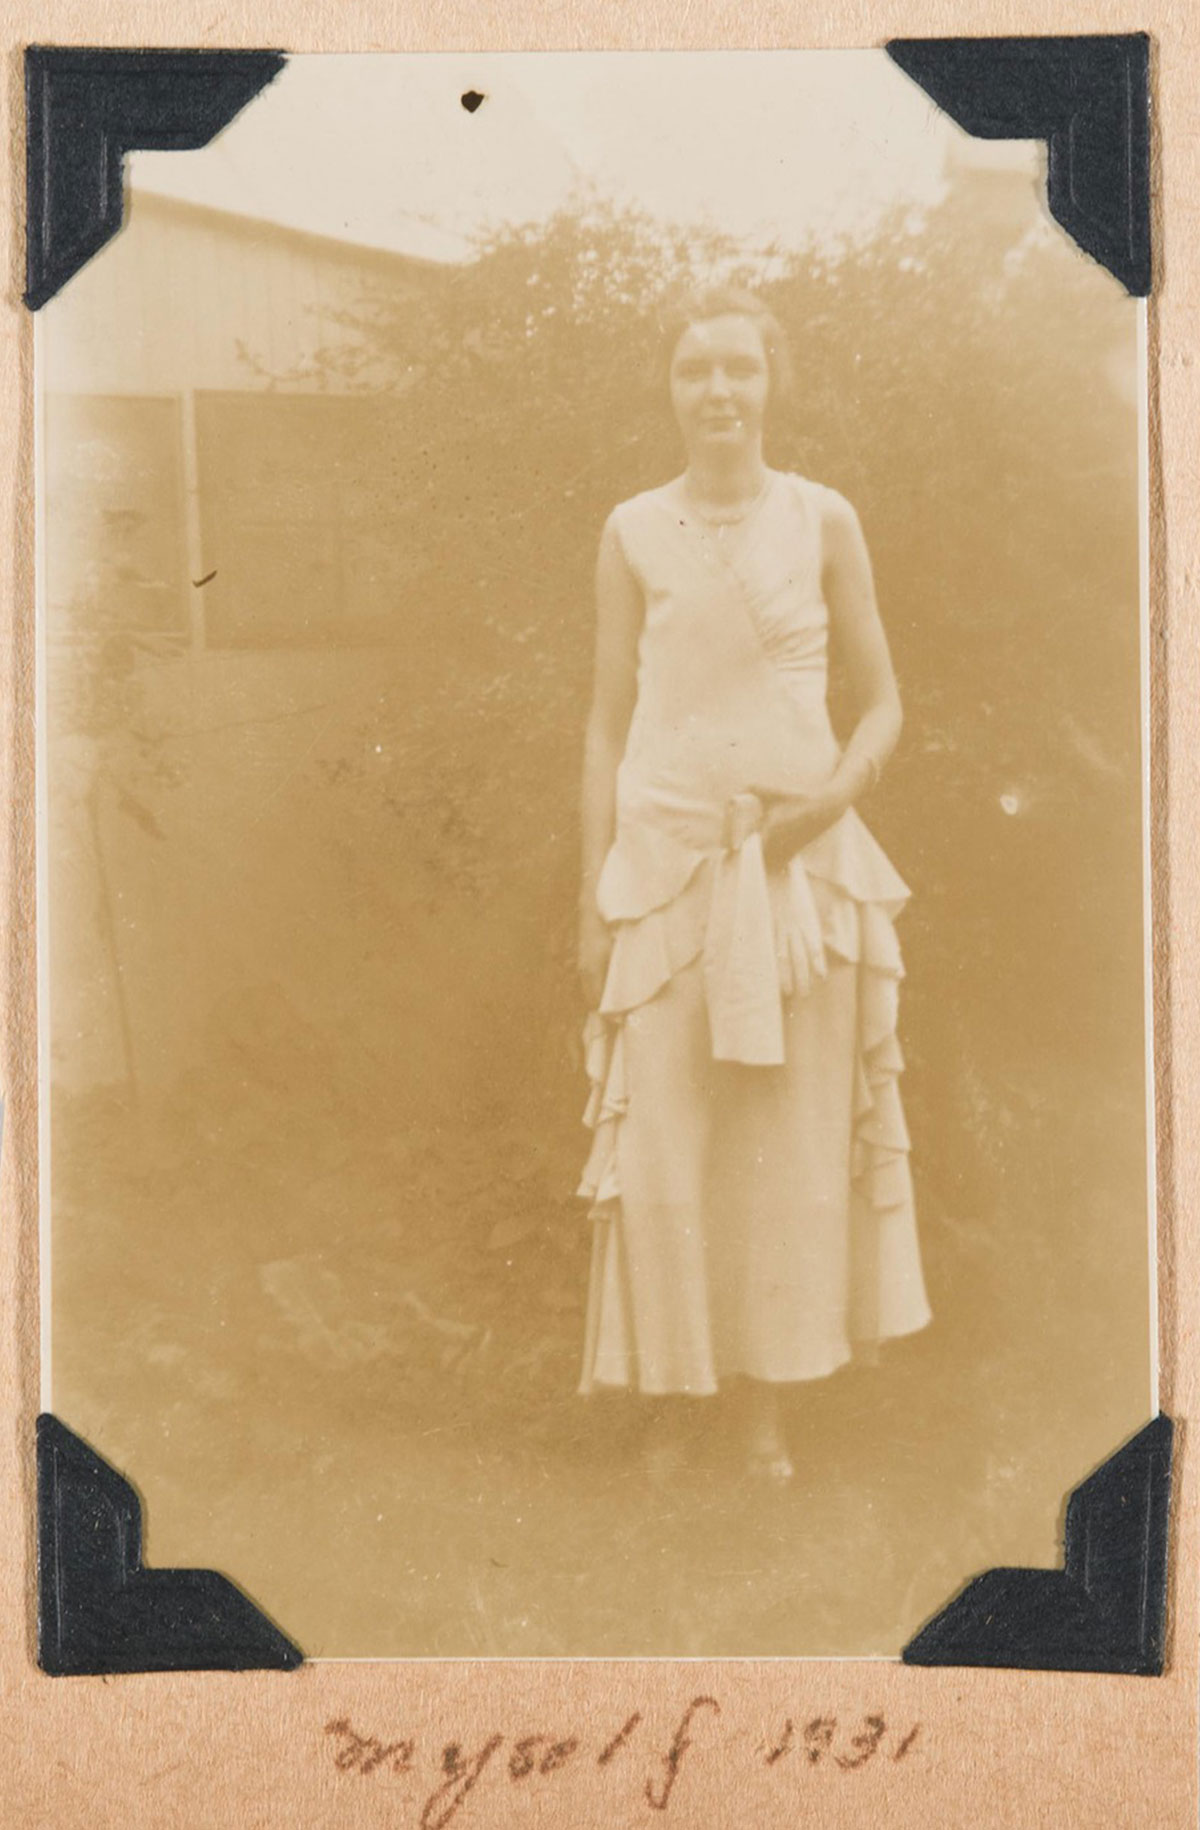 A woman wearing a long, light-colored dress stands outside of a house in front of a large bush; underneath the image is written "myself 1931"